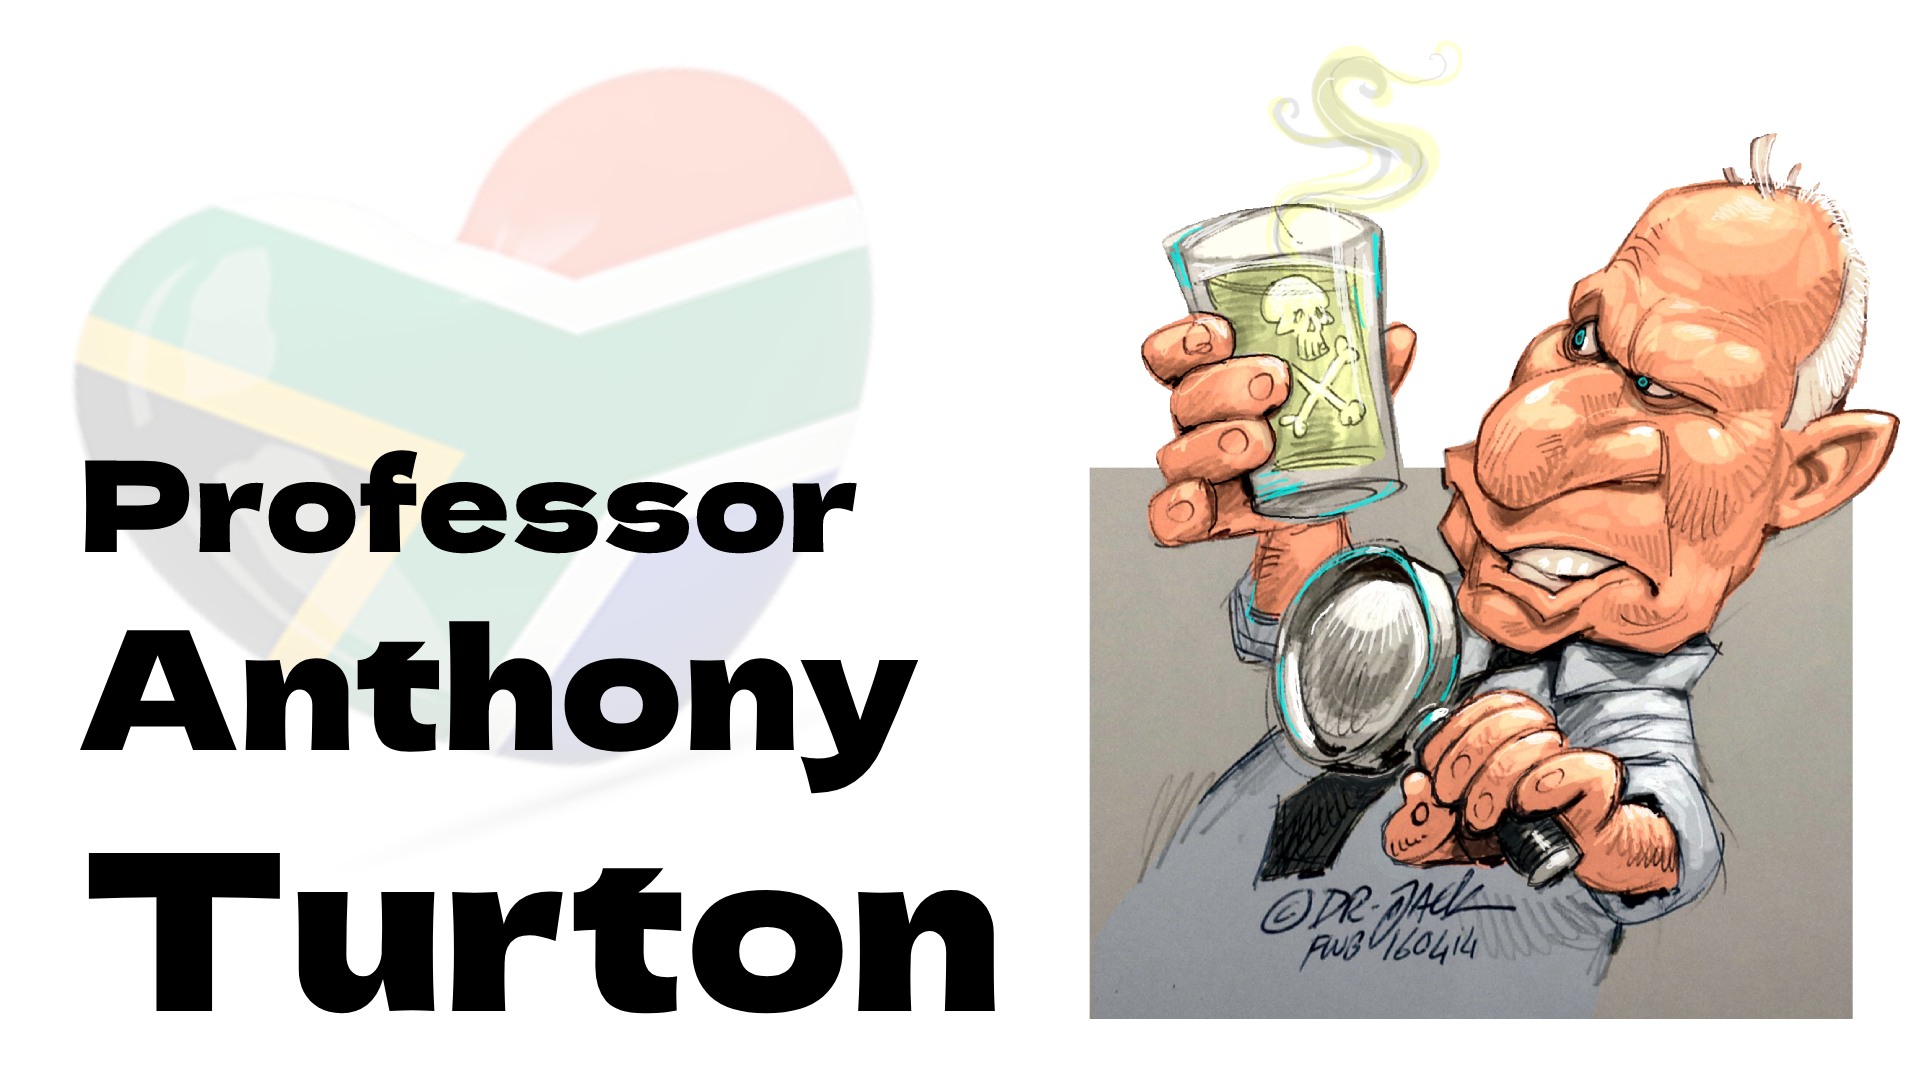 Professor Anthony Turton explains anarchy in words